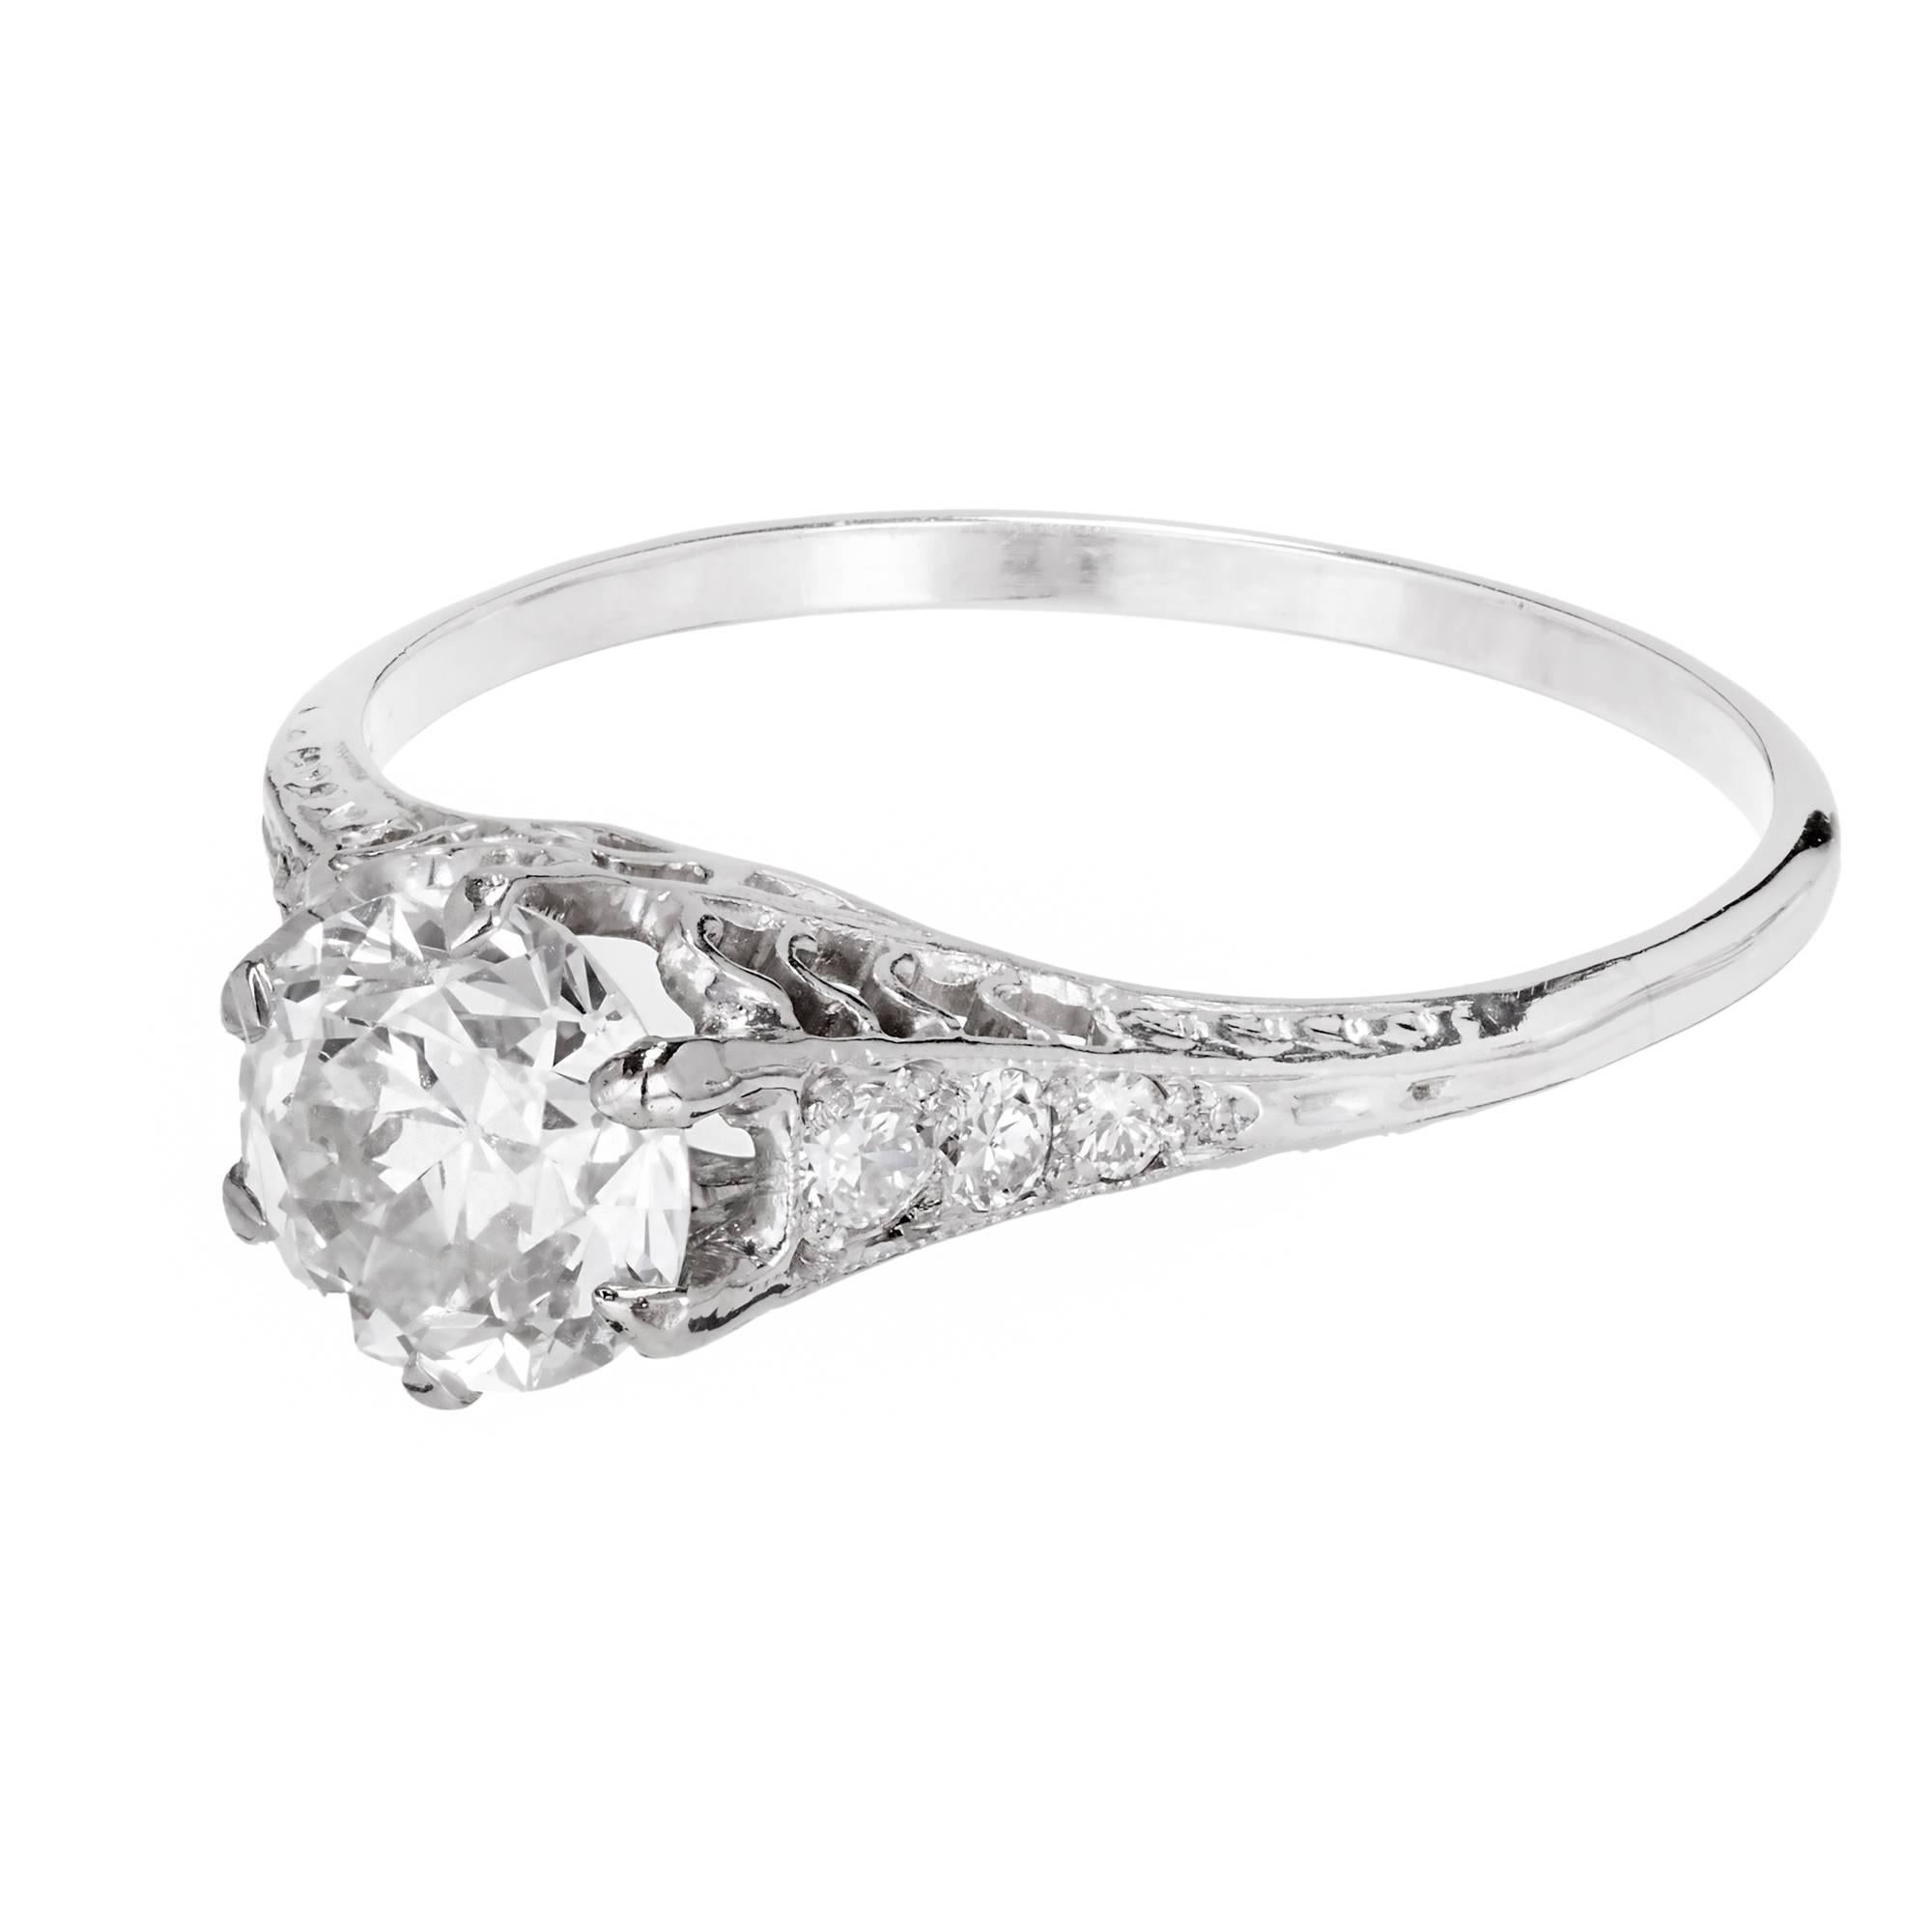 All original Art Deco Platinum filigree engagement ring with an old European cut center Diamond. GIA certified L color and VS1
clarity. Face up color is I to J because of the cutting and ring.

1 old European cut Diamond, approx. total weight